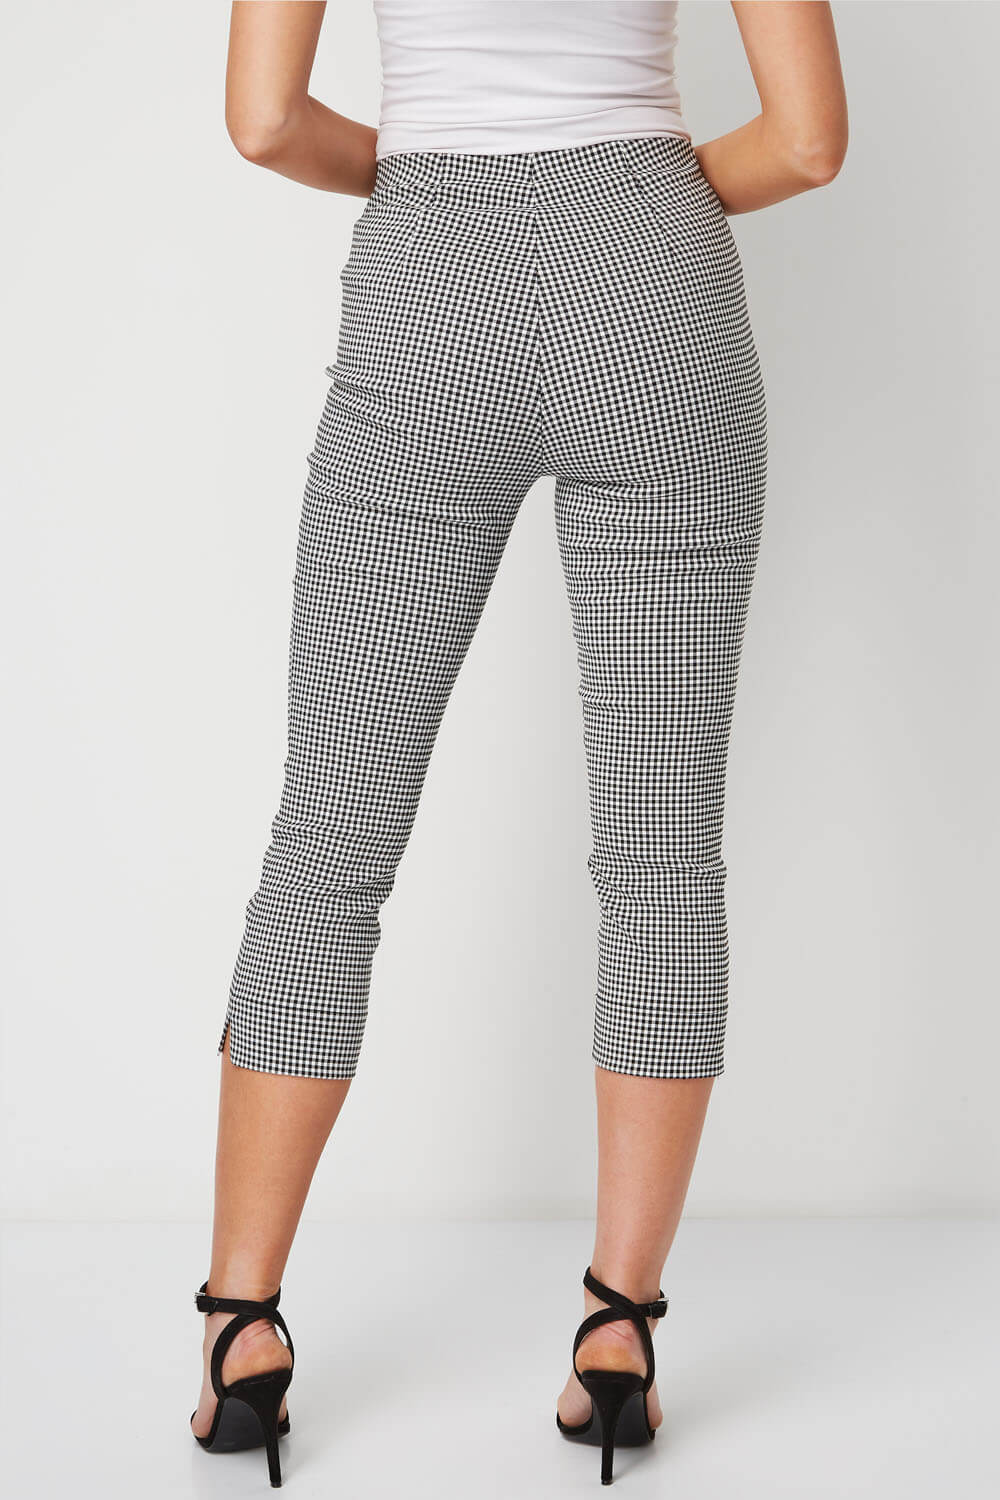 Black Gingham Cropped Stretch Trouser, Image 2 of 5